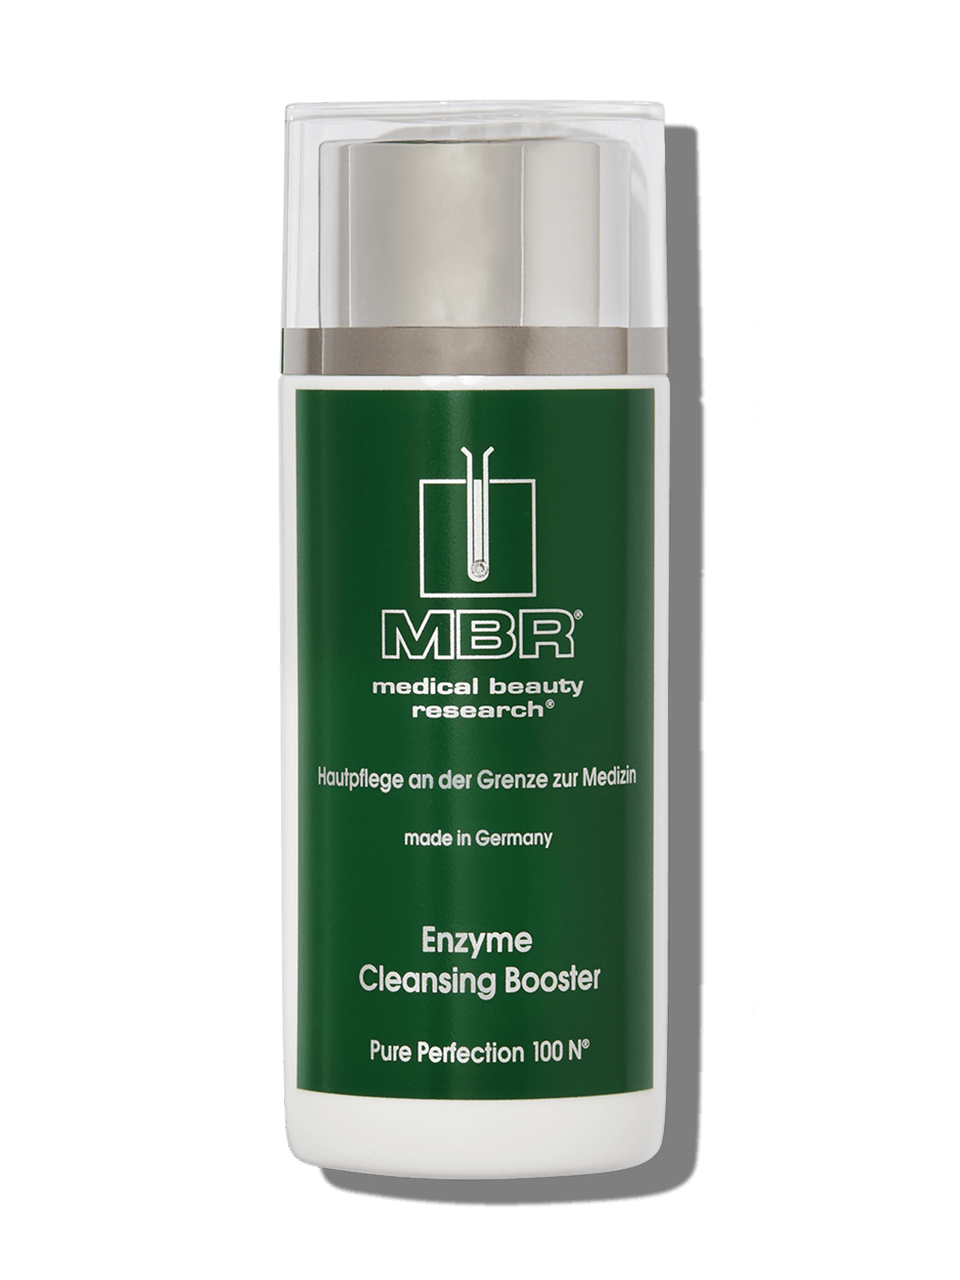 image description Enzyme Cleansing Booster